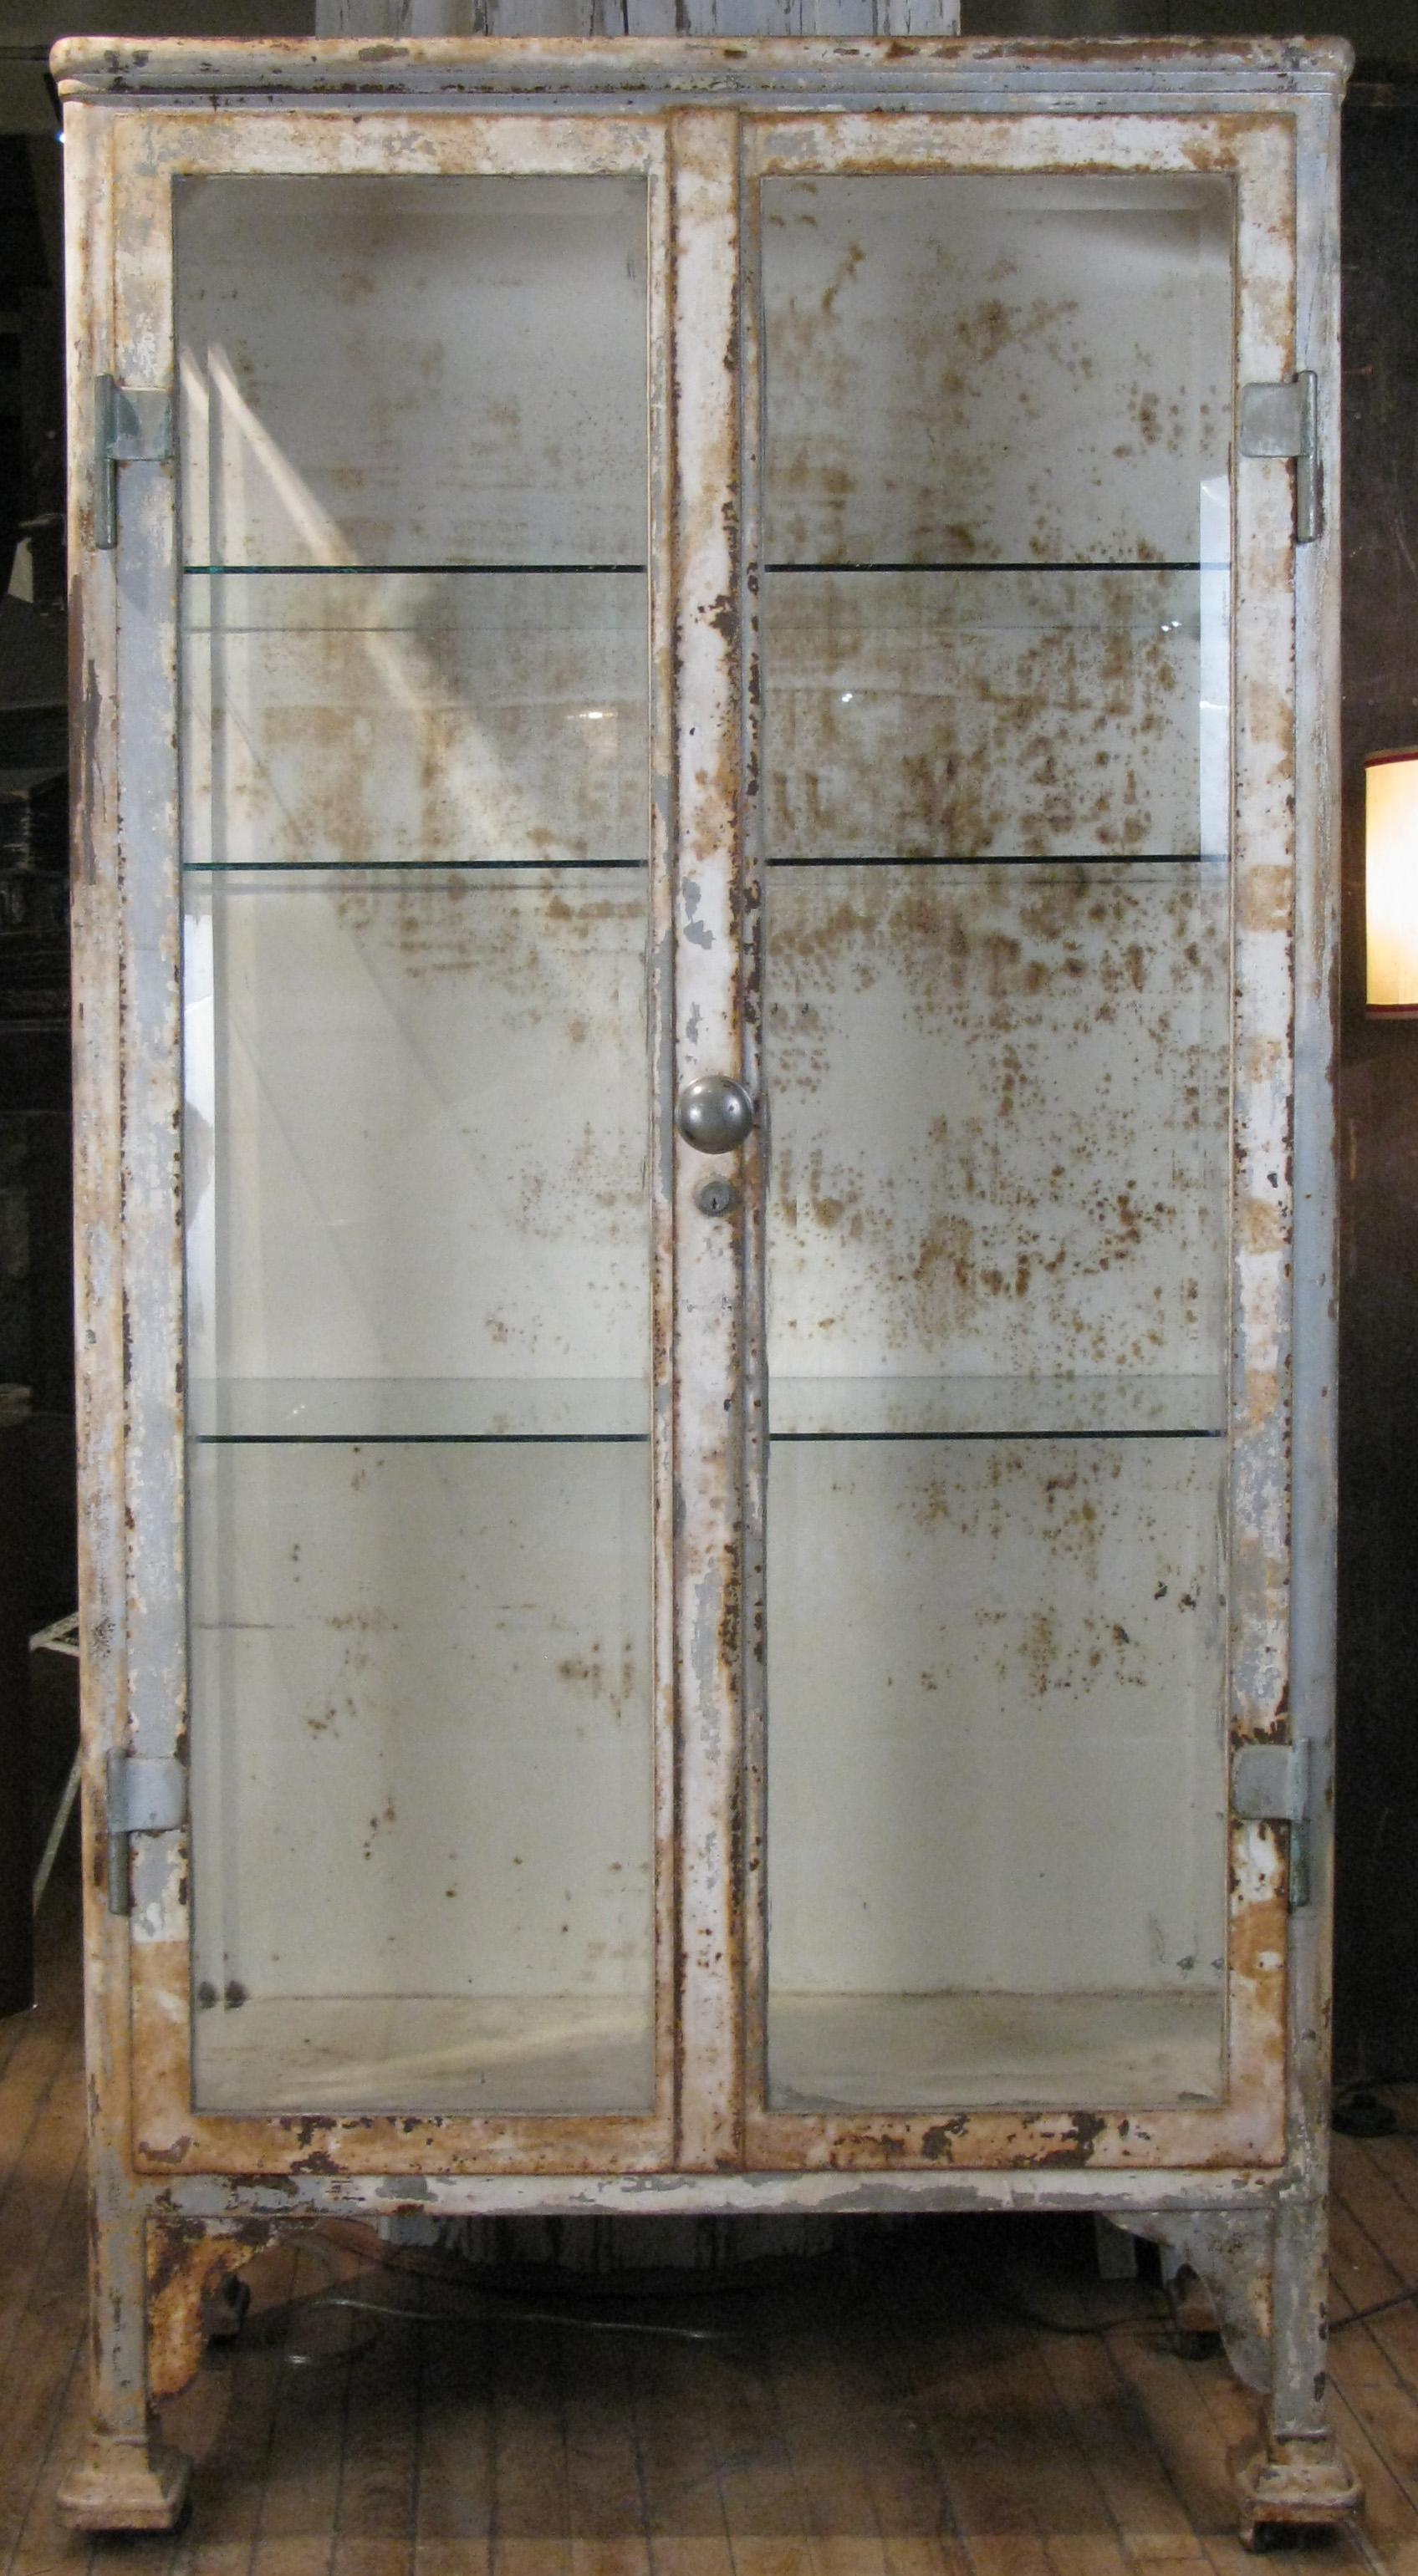 A very handsome antique 1930s apothecary or display cabinet with a cast iron and steel frame, and beveled glass doors and side panels. With glass shelves. In its original distressed white finish. One of the most substantial apothecary cabinets from